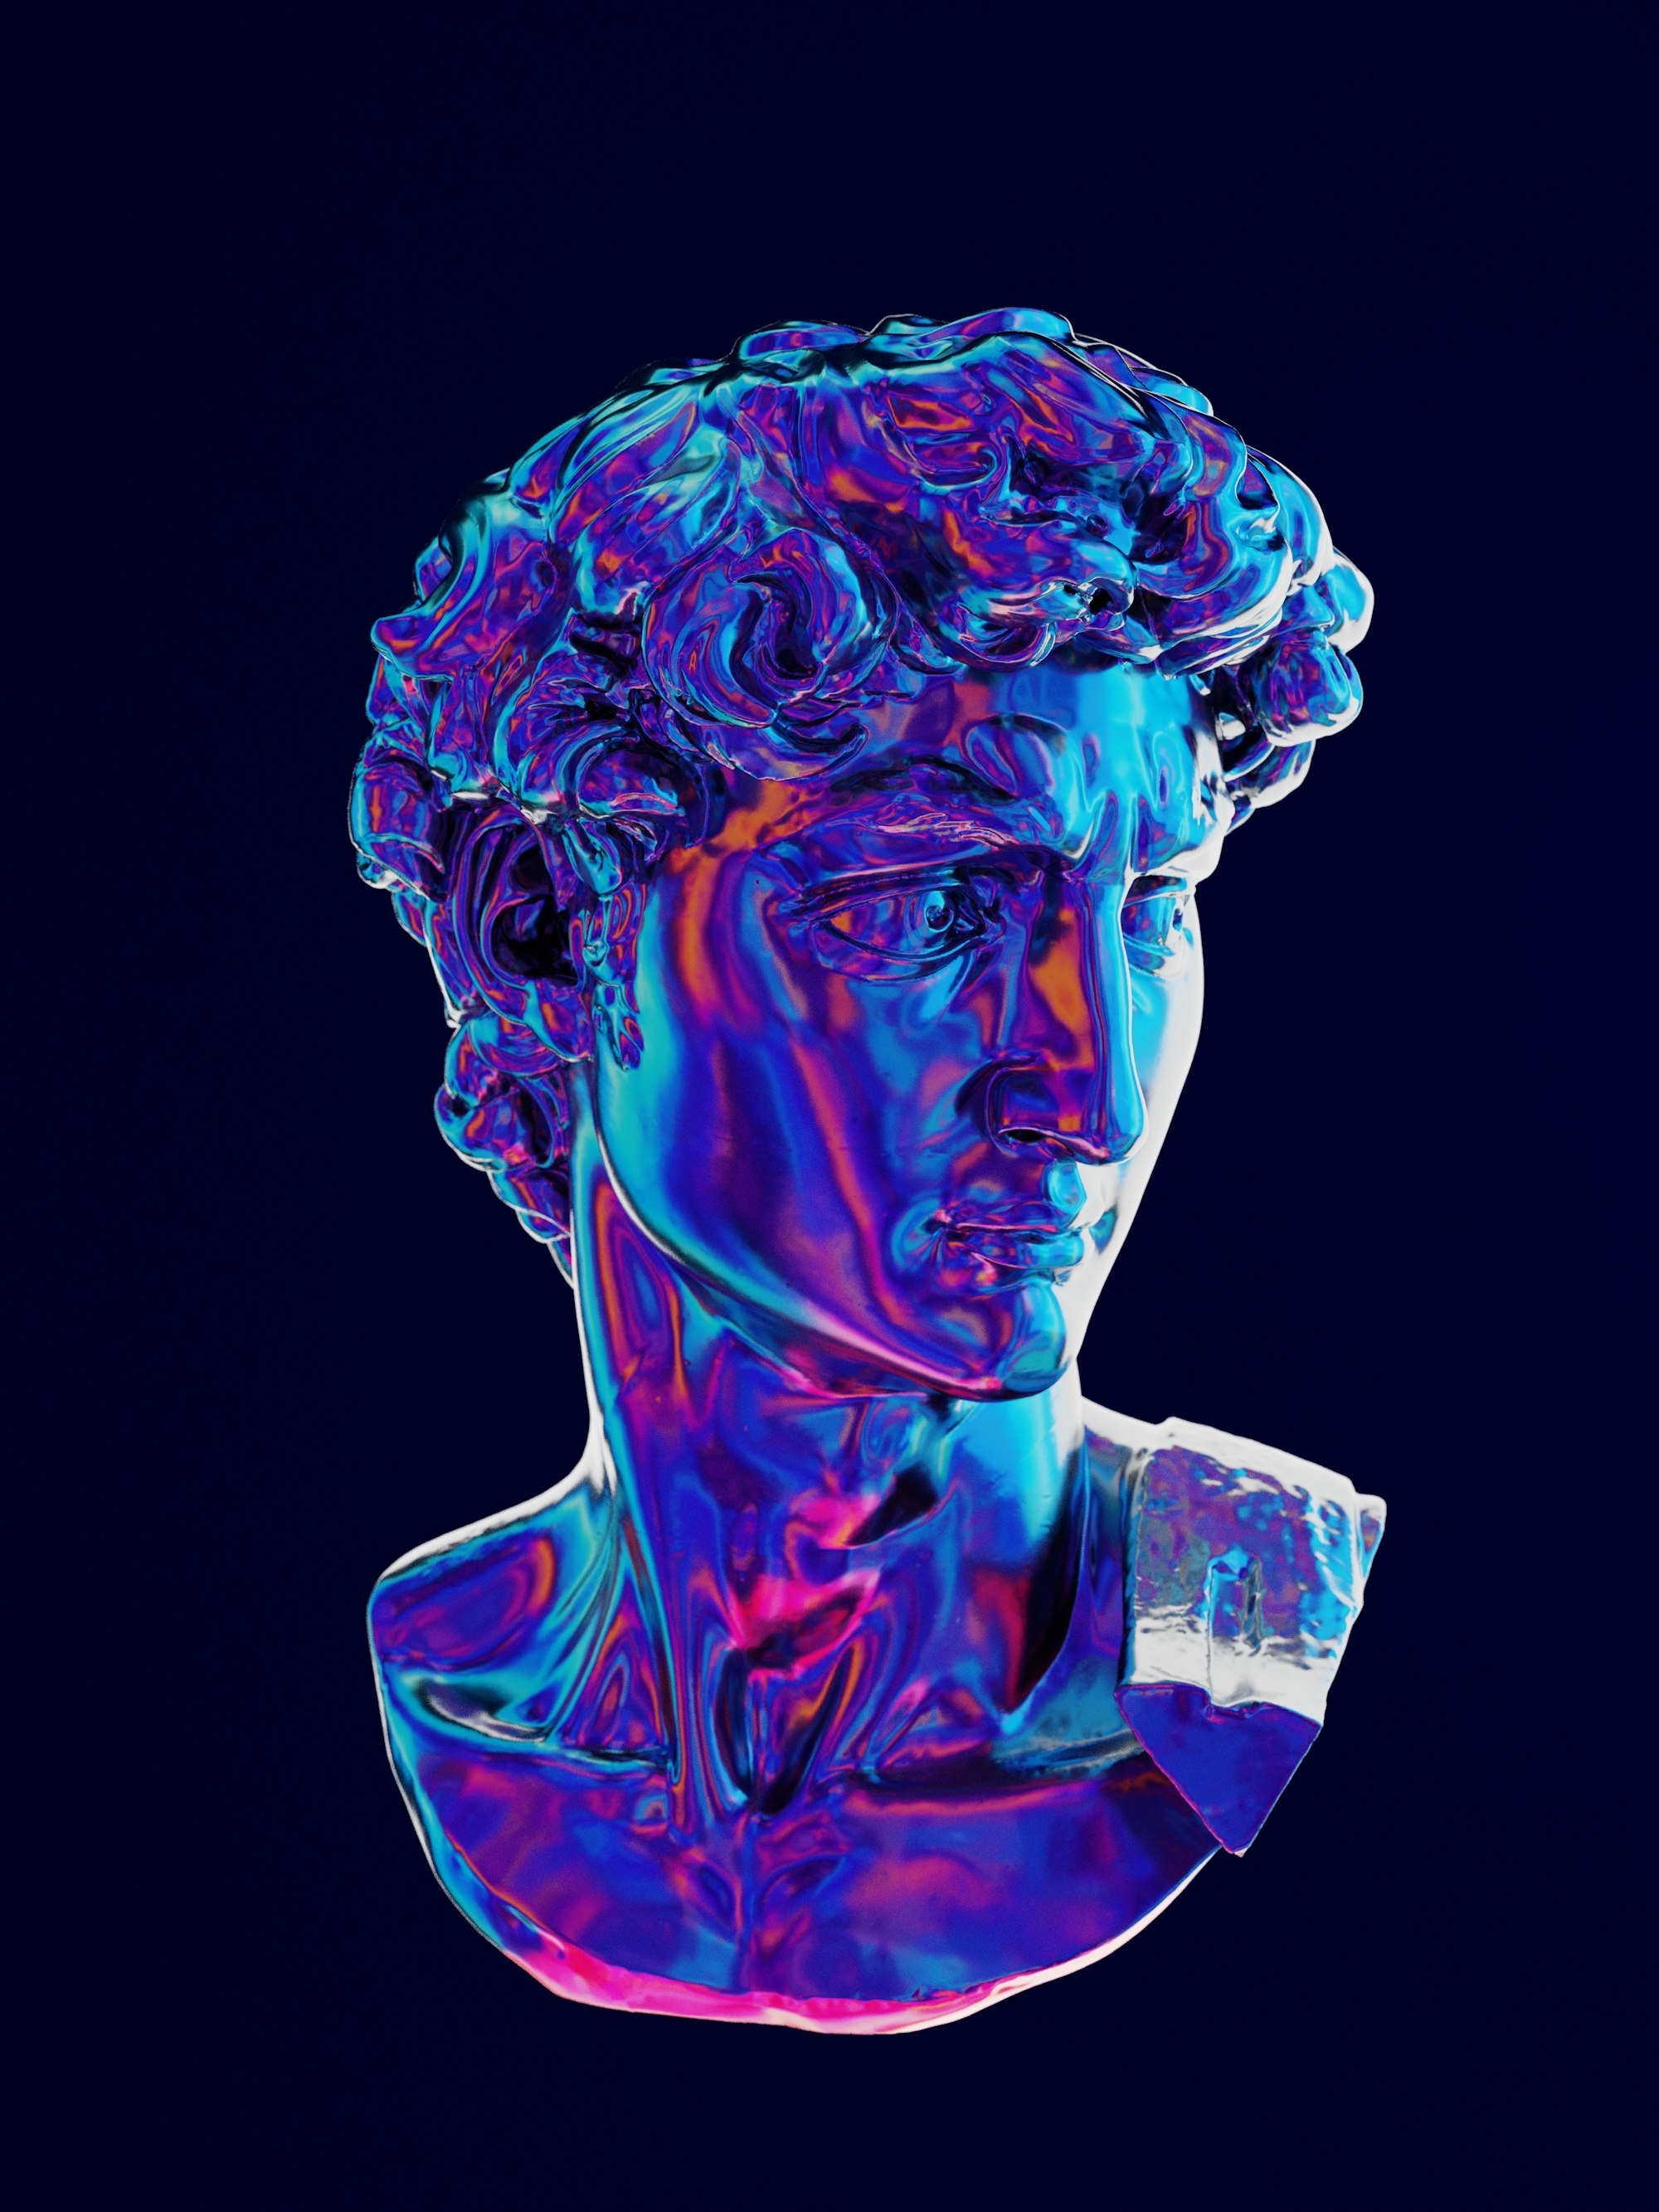 a texture test in blender. Thanks for the CC0 model from Scan the World：https://www.myminifactory.com/object/3d-print-head-of-michelangelo-s-david-52645 